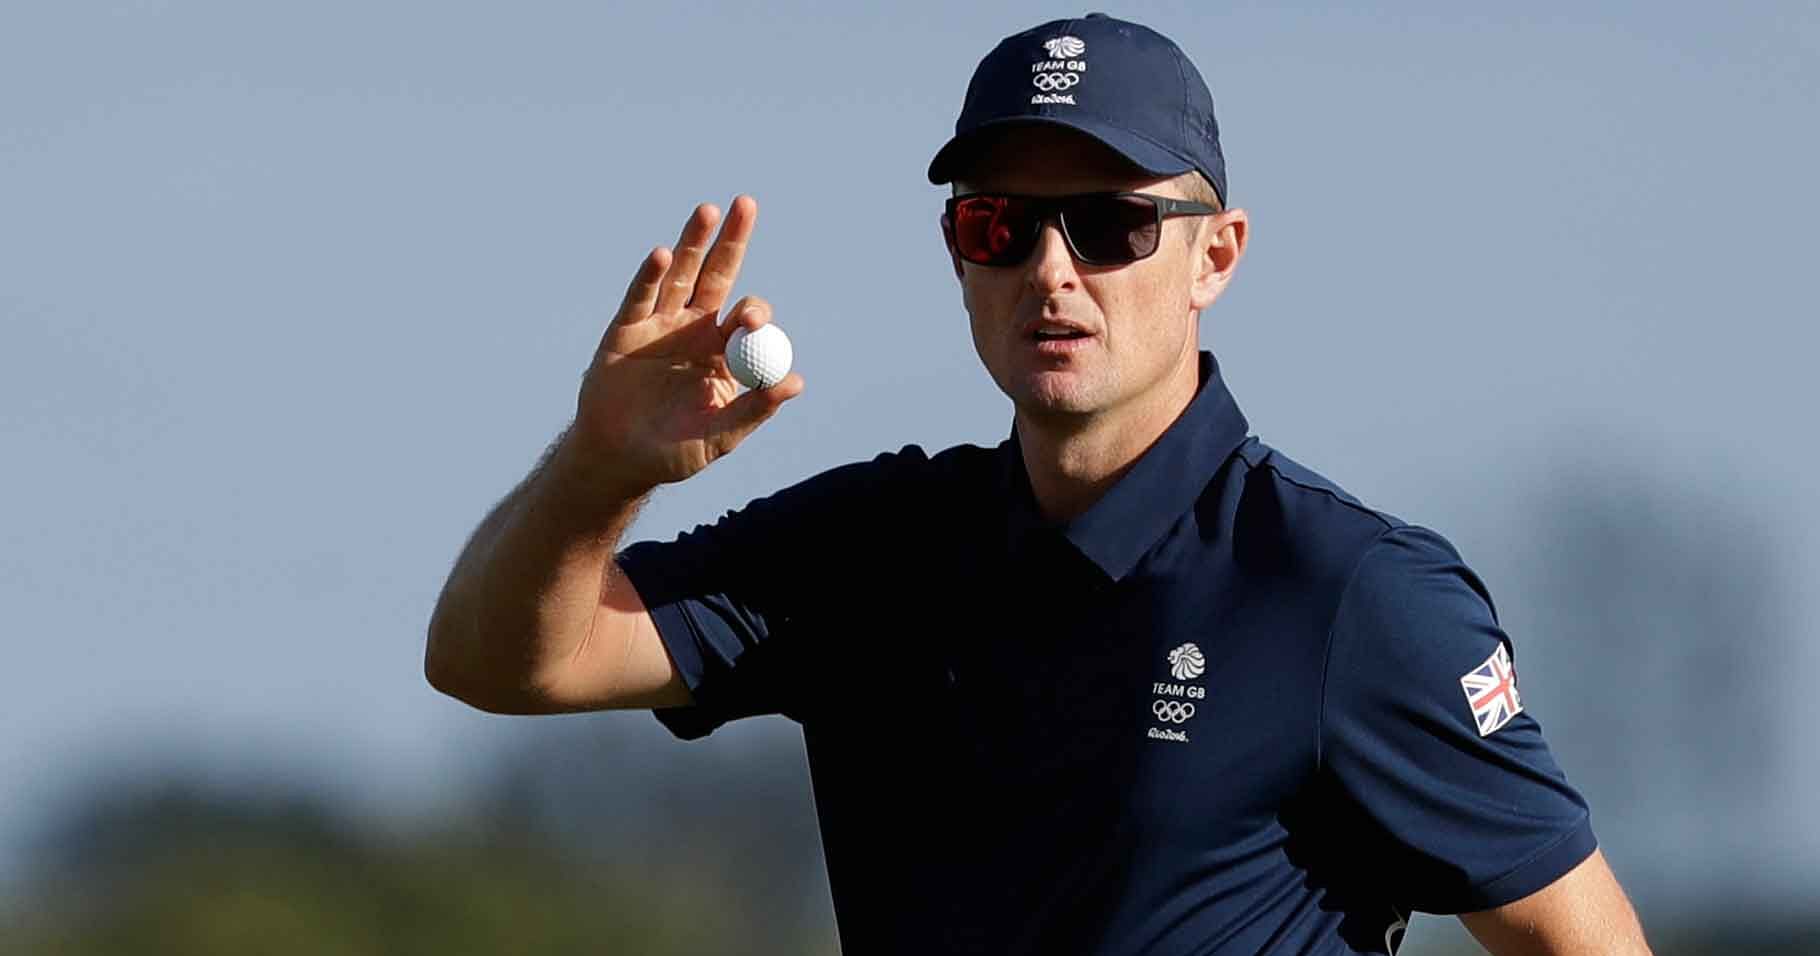 Justin Rose Hits Olympic’s First Hole In One, Creates History